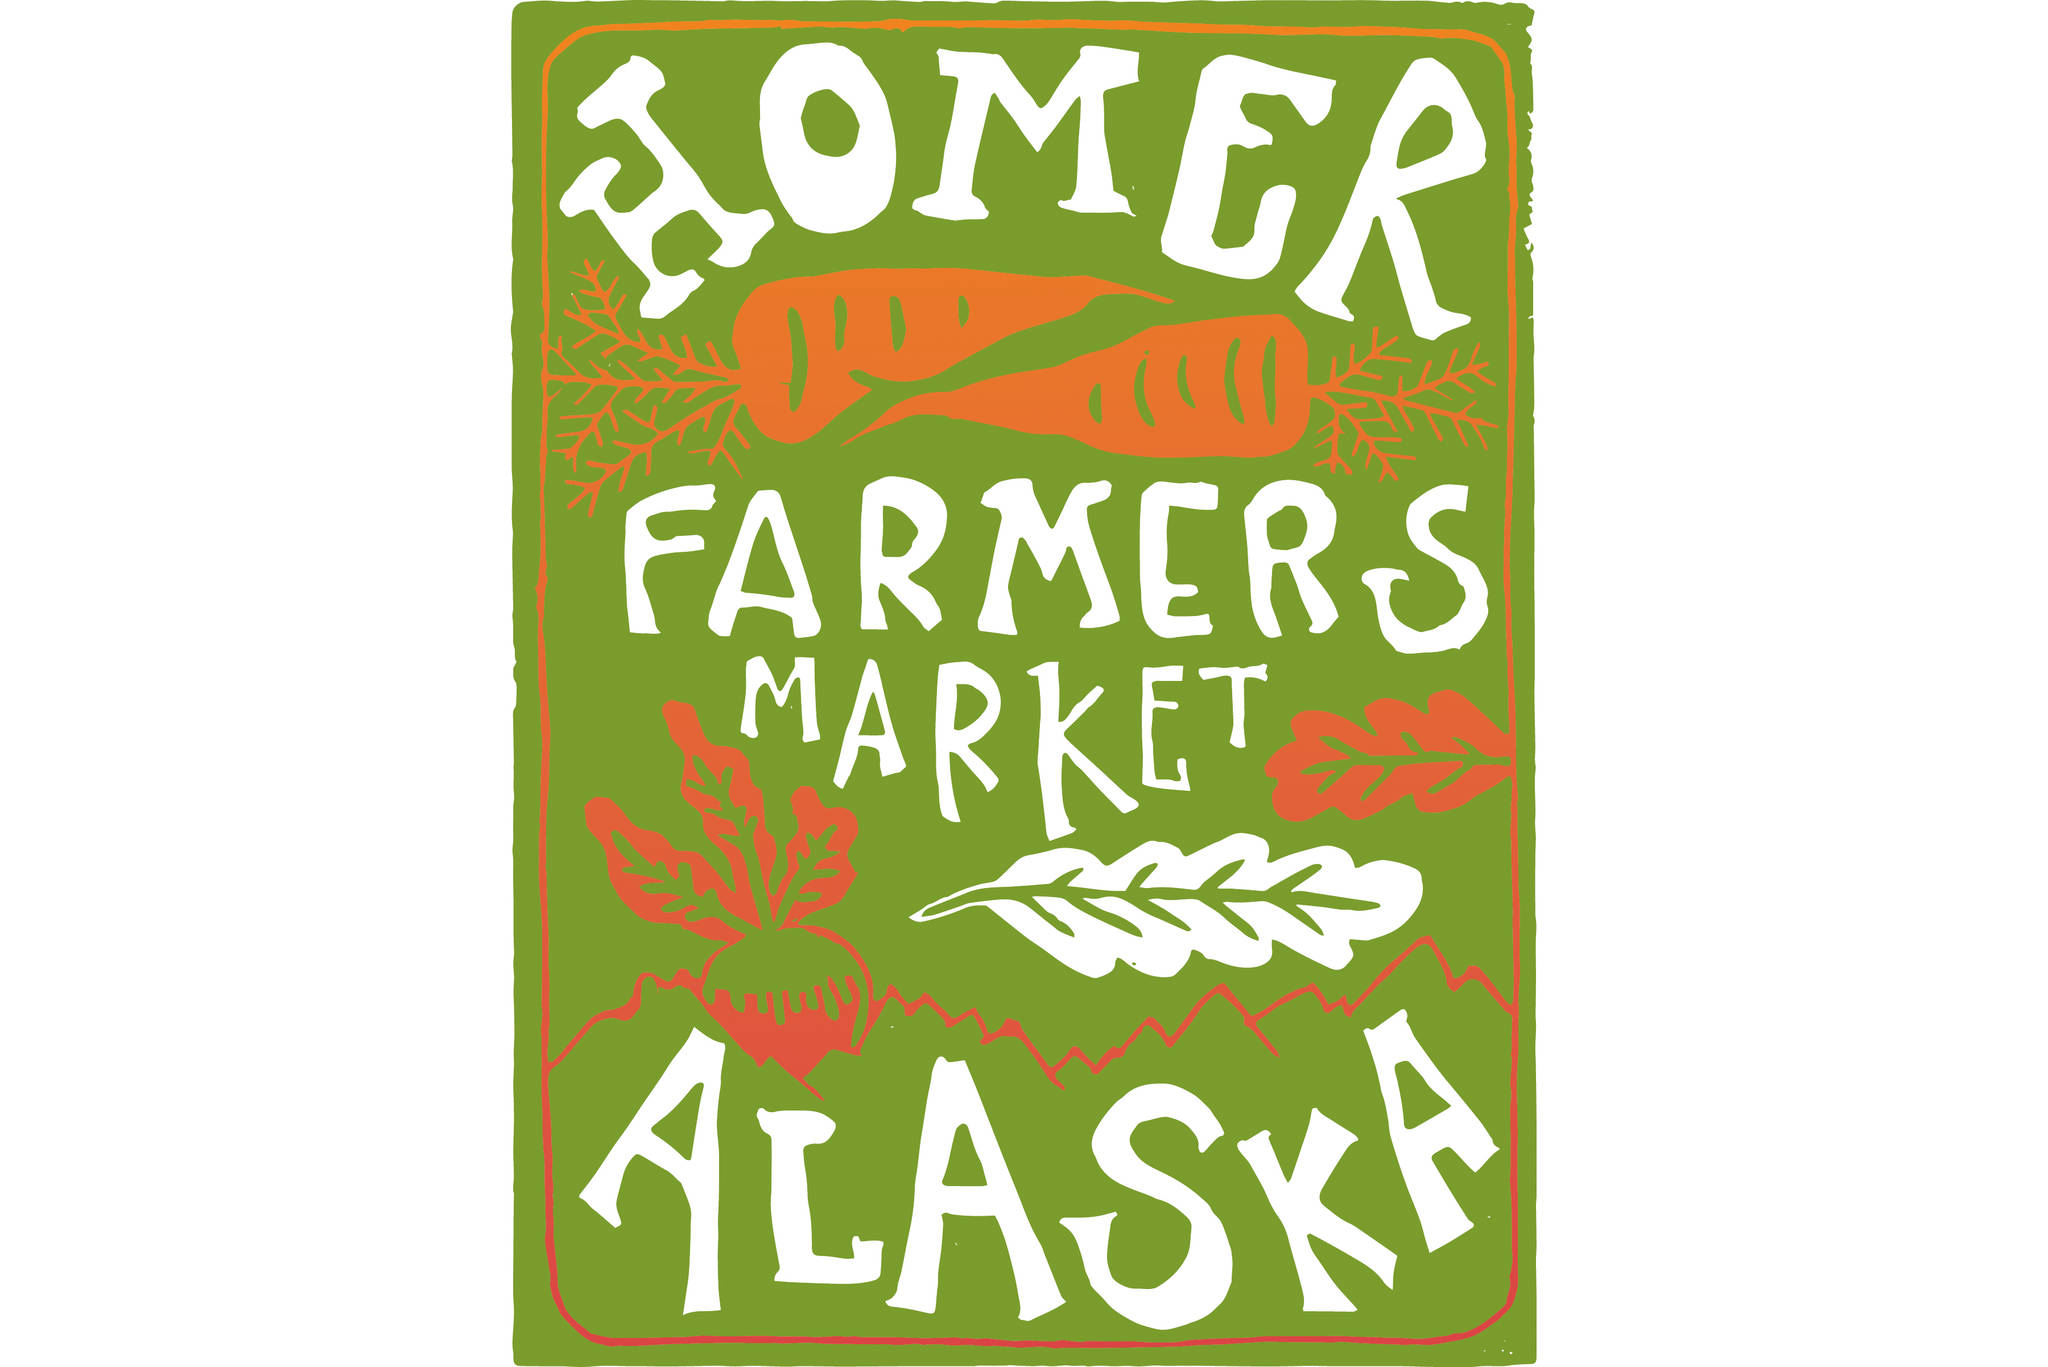 Homer Farmers Market: Market offers a chance to meet and learn from growers